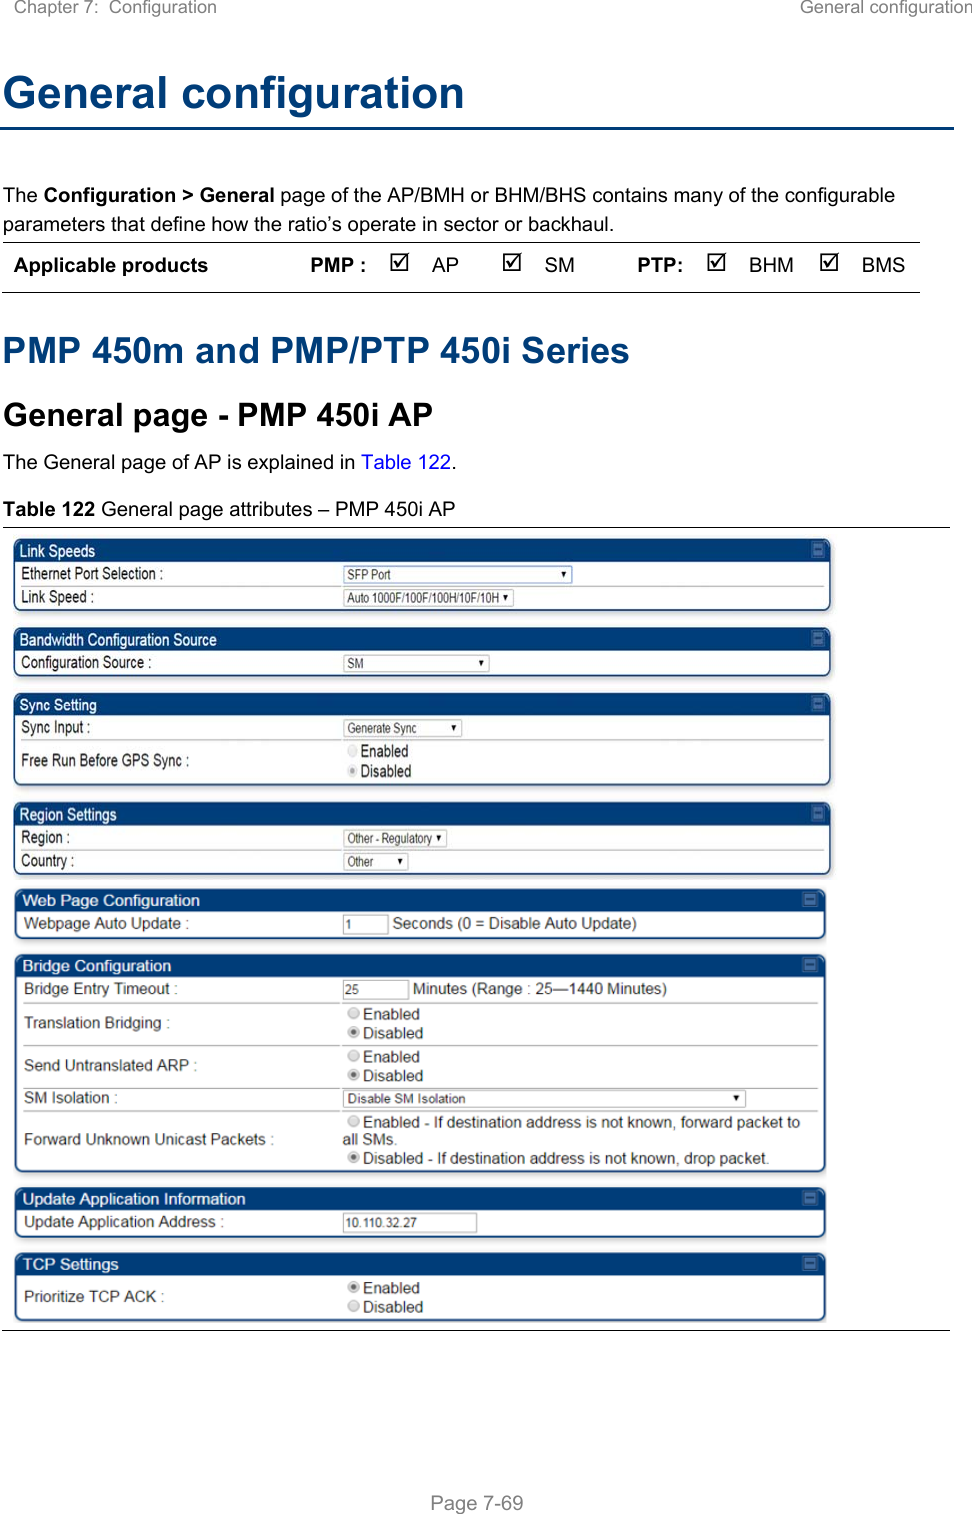 Chapter 7:  Configuration  General configuration   Page 7-69 General configuration The Configuration &gt; General page of the AP/BMH or BHM/BHS contains many of the configurable parameters that define how the ratio’s operate in sector or backhaul. Applicable products  PMP : AP SM PTP:BHM  BMS PMP 450m and PMP/PTP 450i Series General page - PMP 450i AP  The General page of AP is explained in Table 122.  Table 122 General page attributes – PMP 450i AP    